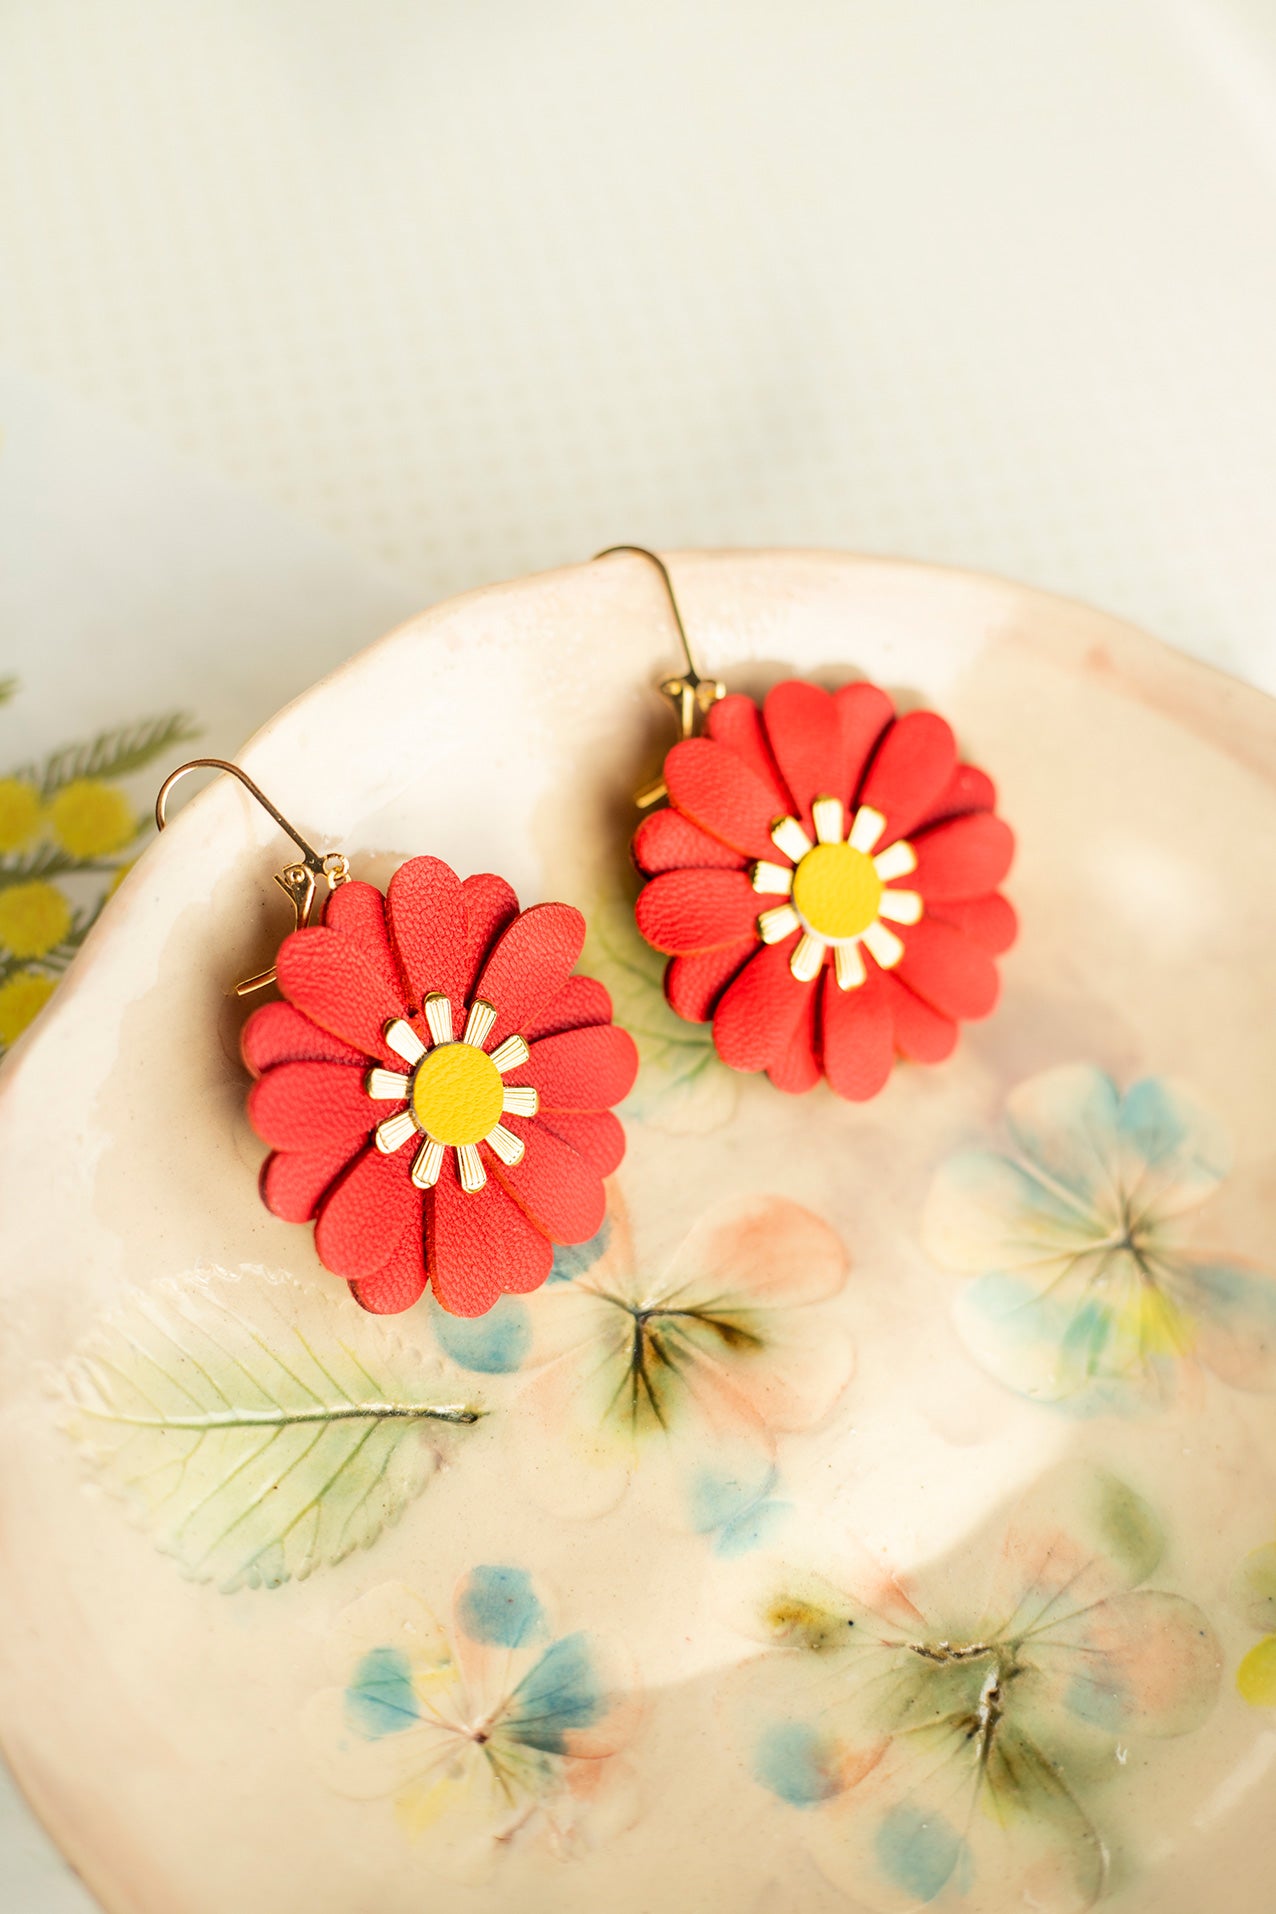 Zinnia flower earrings - bright red and yellow leather